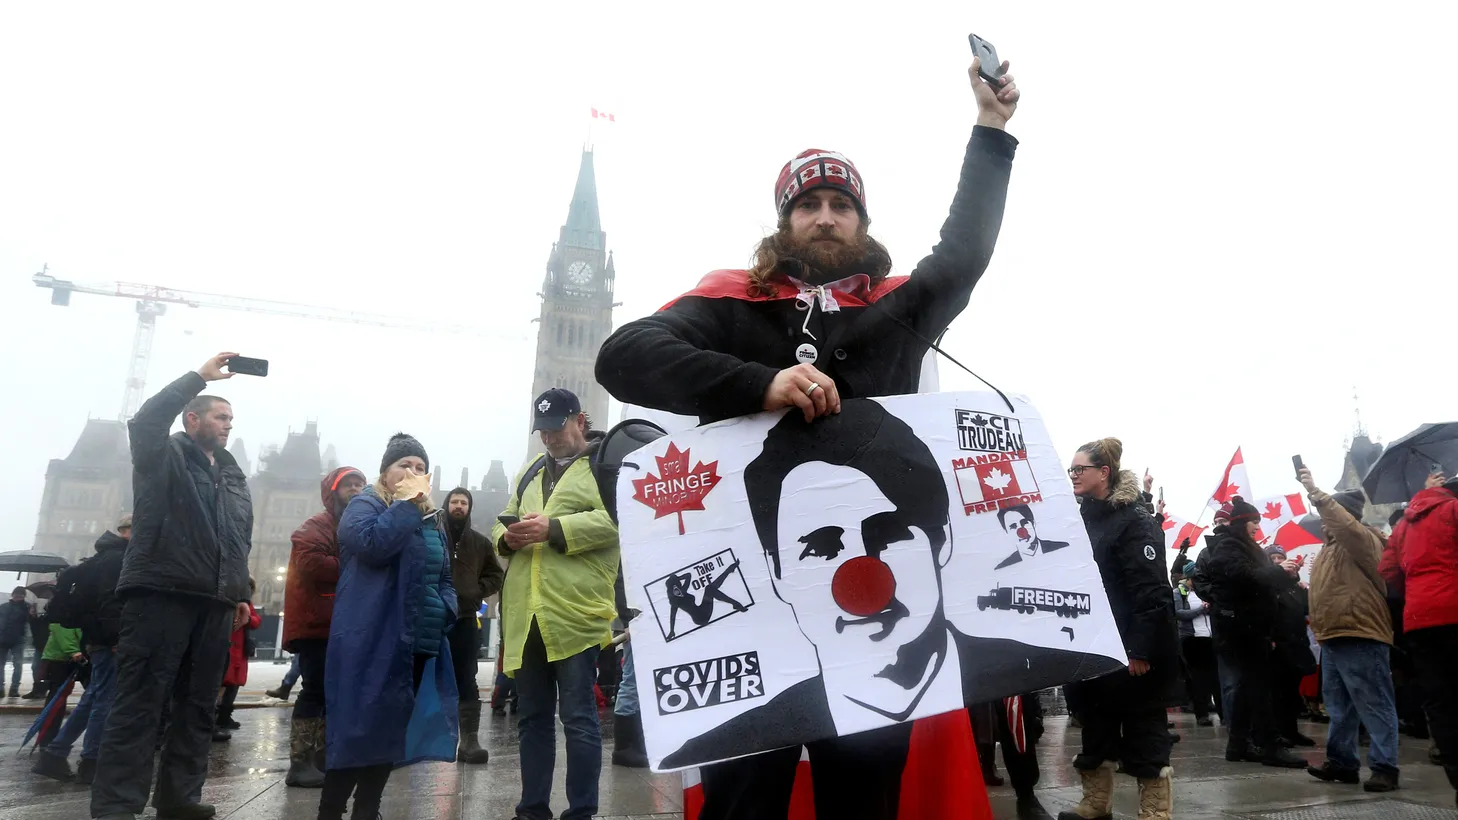 A person holds a sign of Canada's Prime Minister Justin Trudeau on Parliament Hill, as truckers and their supporters continue to protest COVID-19 vaccine mandates, in Ottawa, Canada, Feb. 17, 2022.